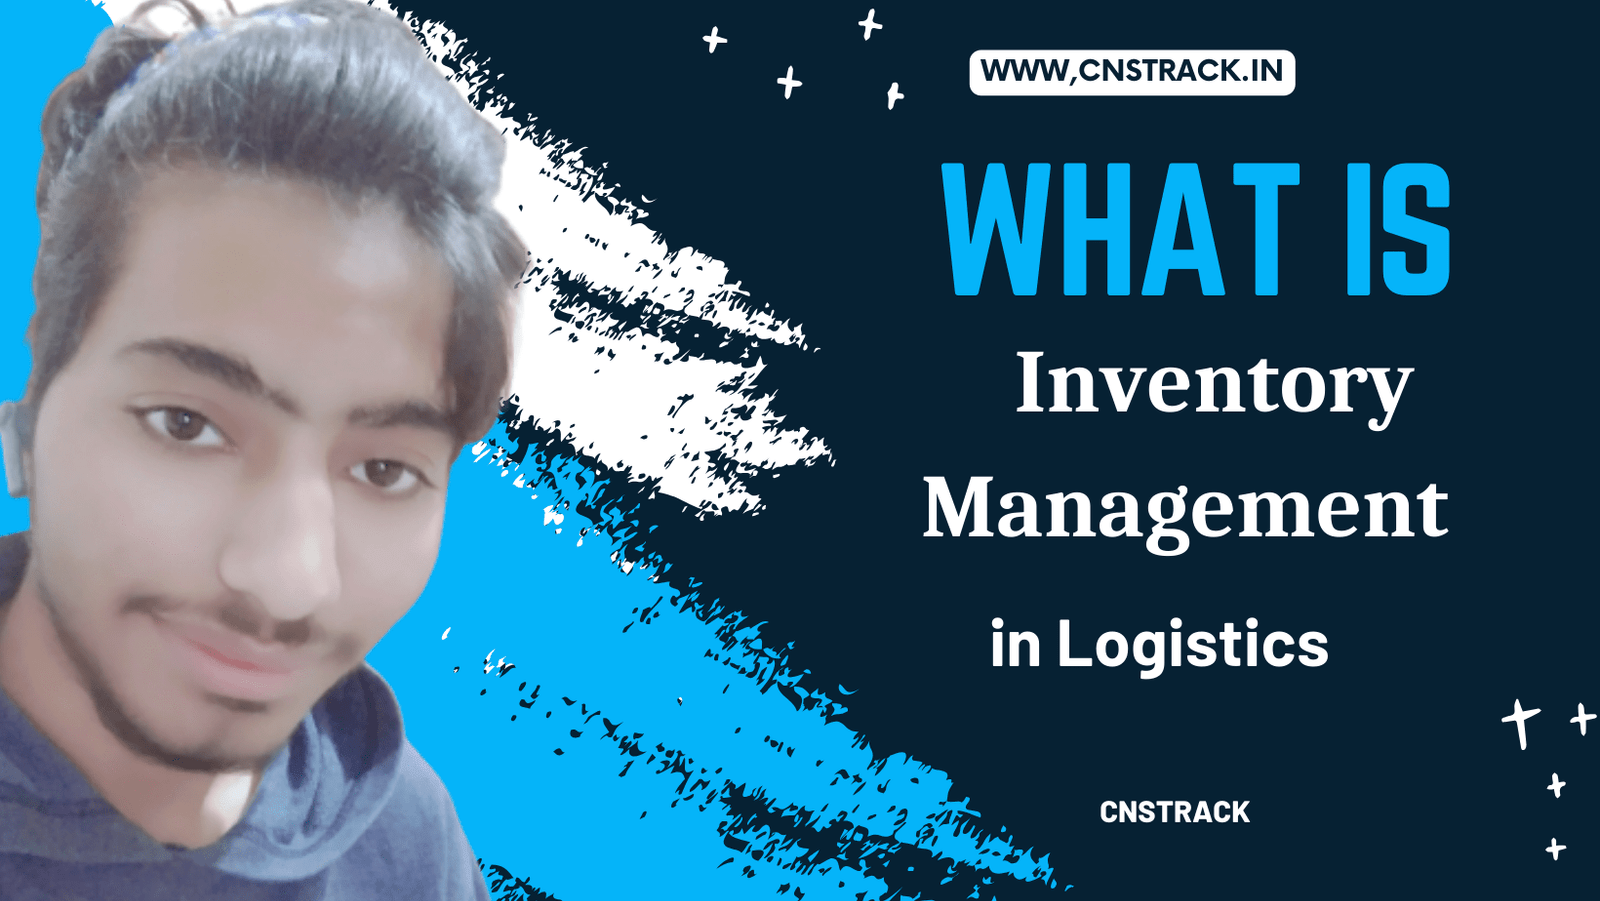 What is Inventory Management in Logistics